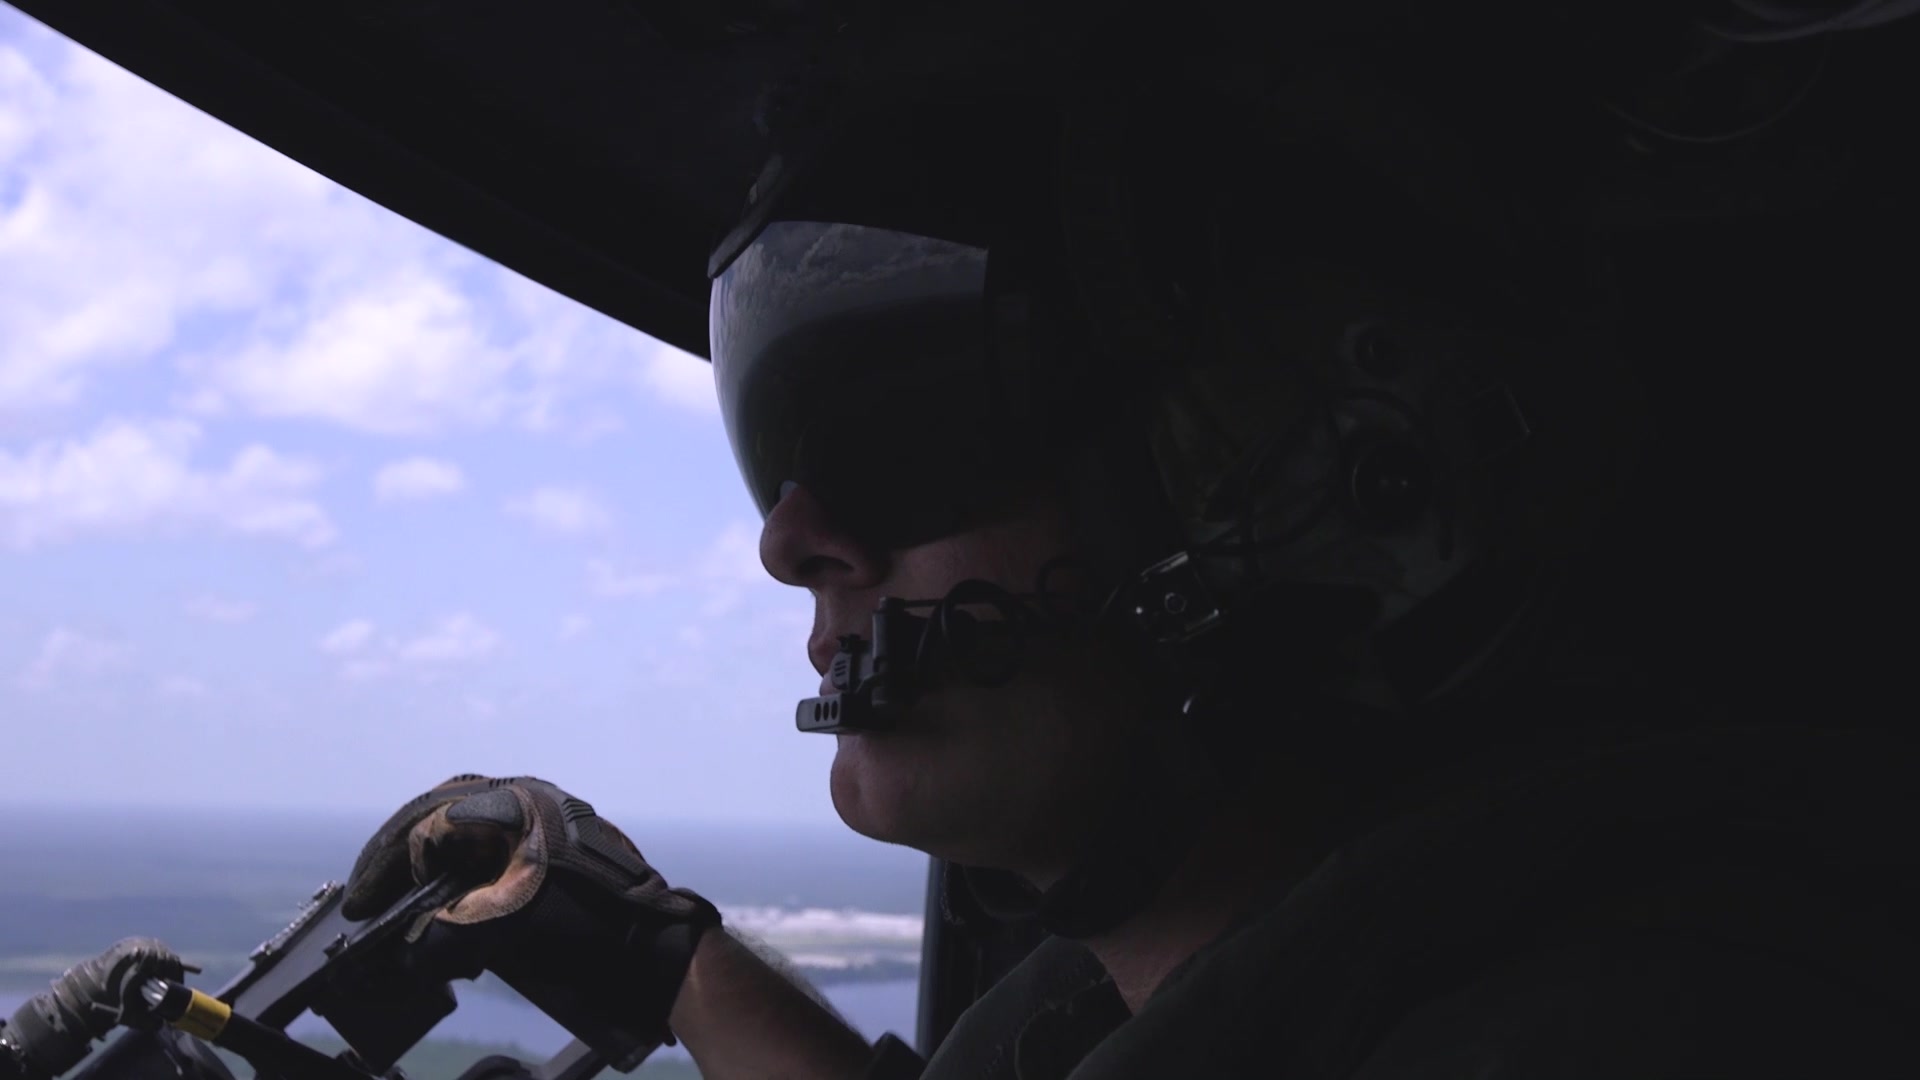 Marines with Marine Light Attack Helicopter Squadron 269 participate in a live fire range over Marine Corps Base Camp Lejeune, North Carolina, July 31, 2020. HMLA-269 practiced close air support and aerial surveillance to maintain mission readiness. (U.S. Marine Corps video by Lance Cpl. Gavin T. Umboh)

Music: www.bensound.com